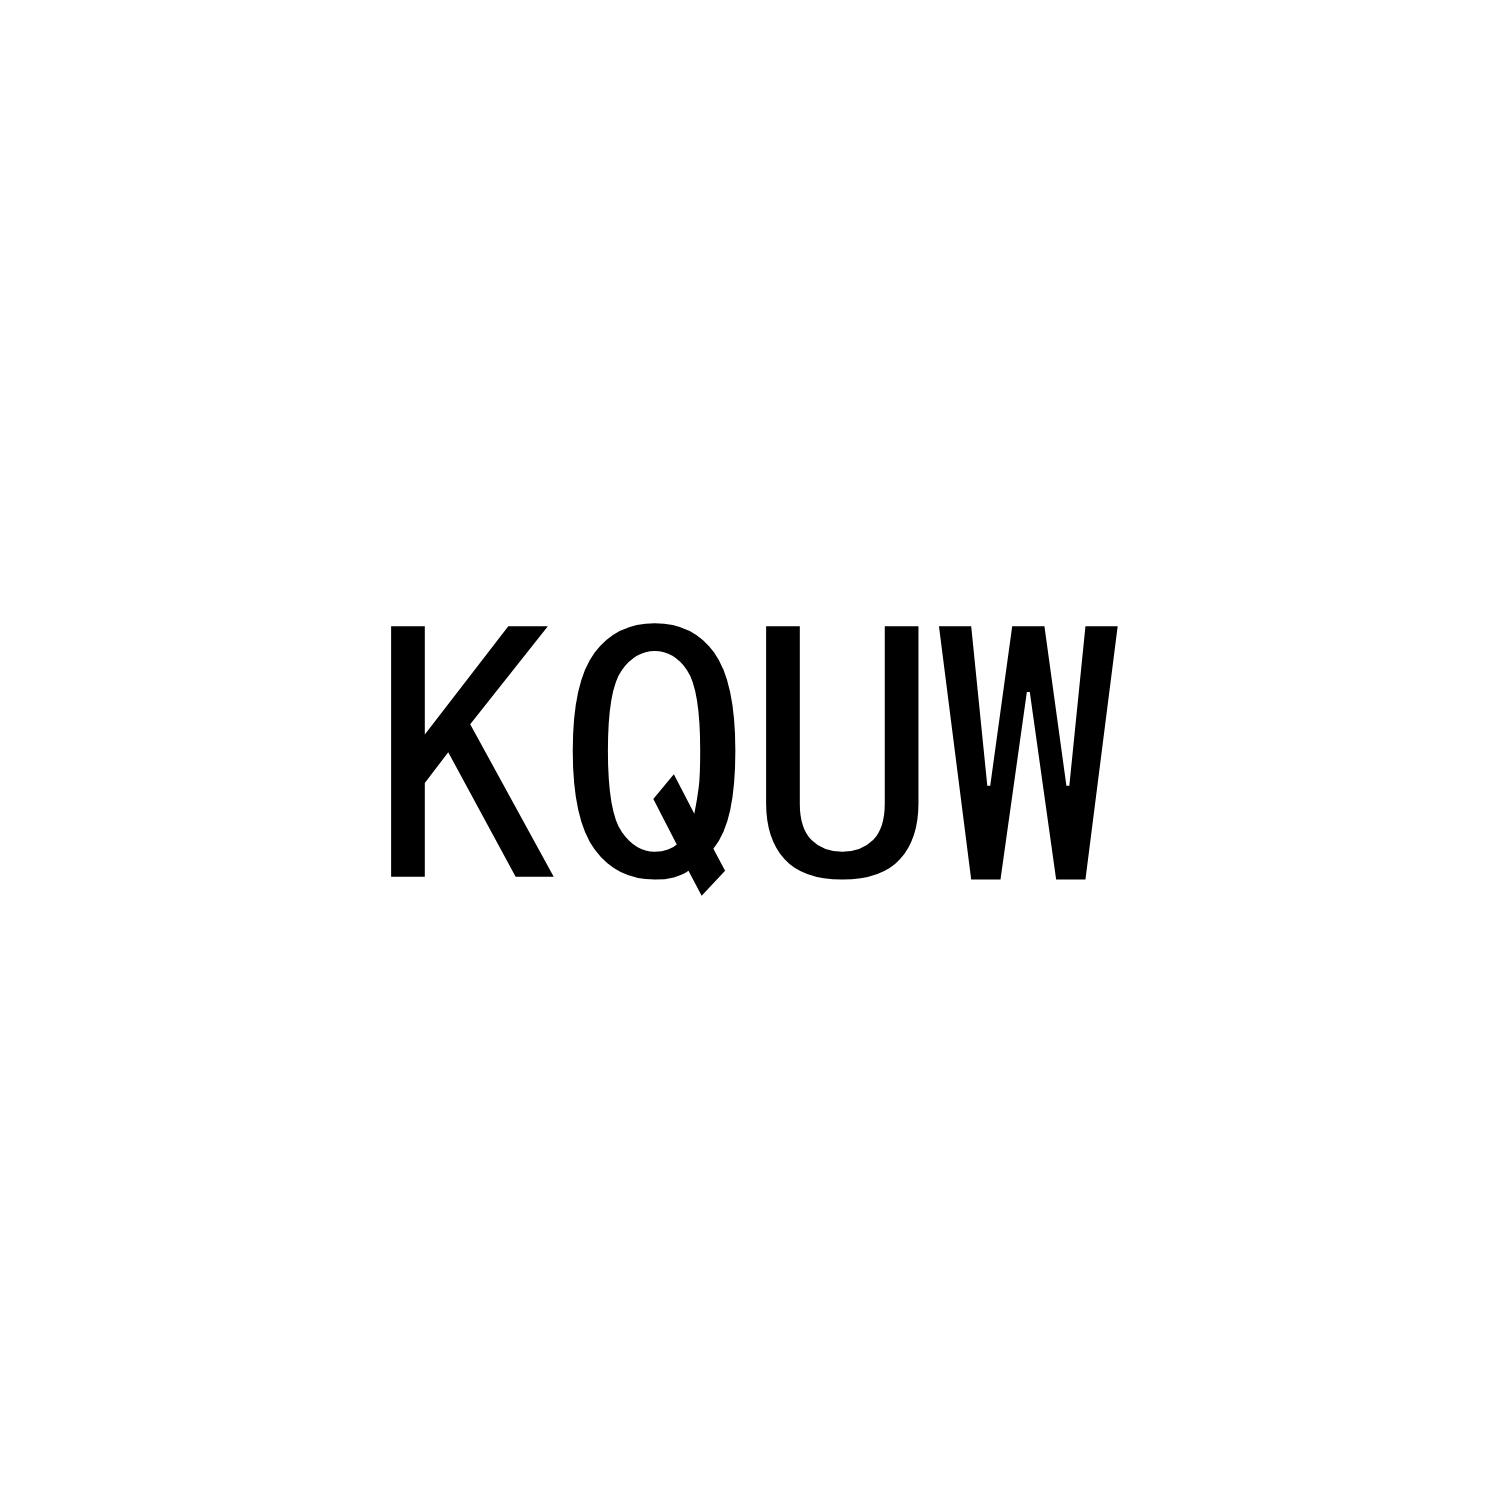 KQUW